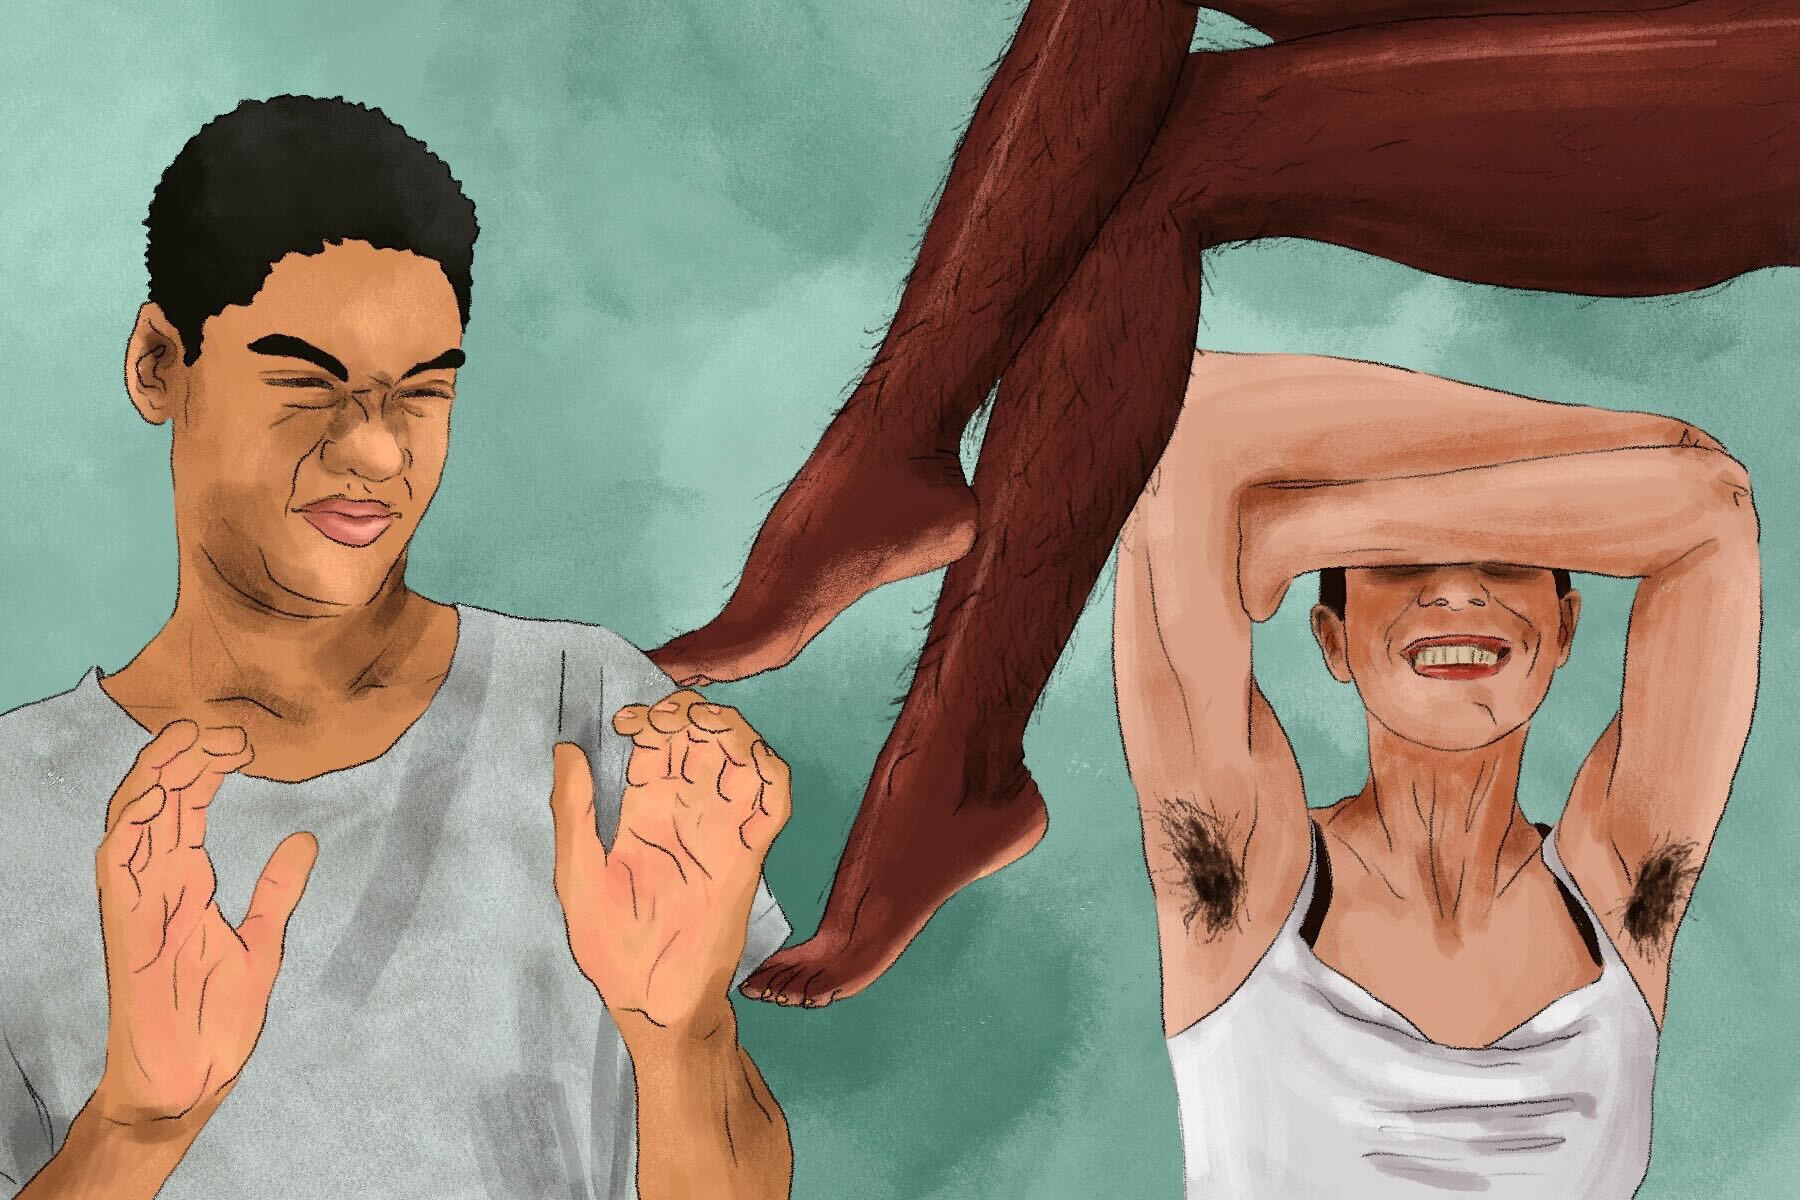 Illustration of a man looking disgusted at two women's body hair for an article about hair removal stigmas.